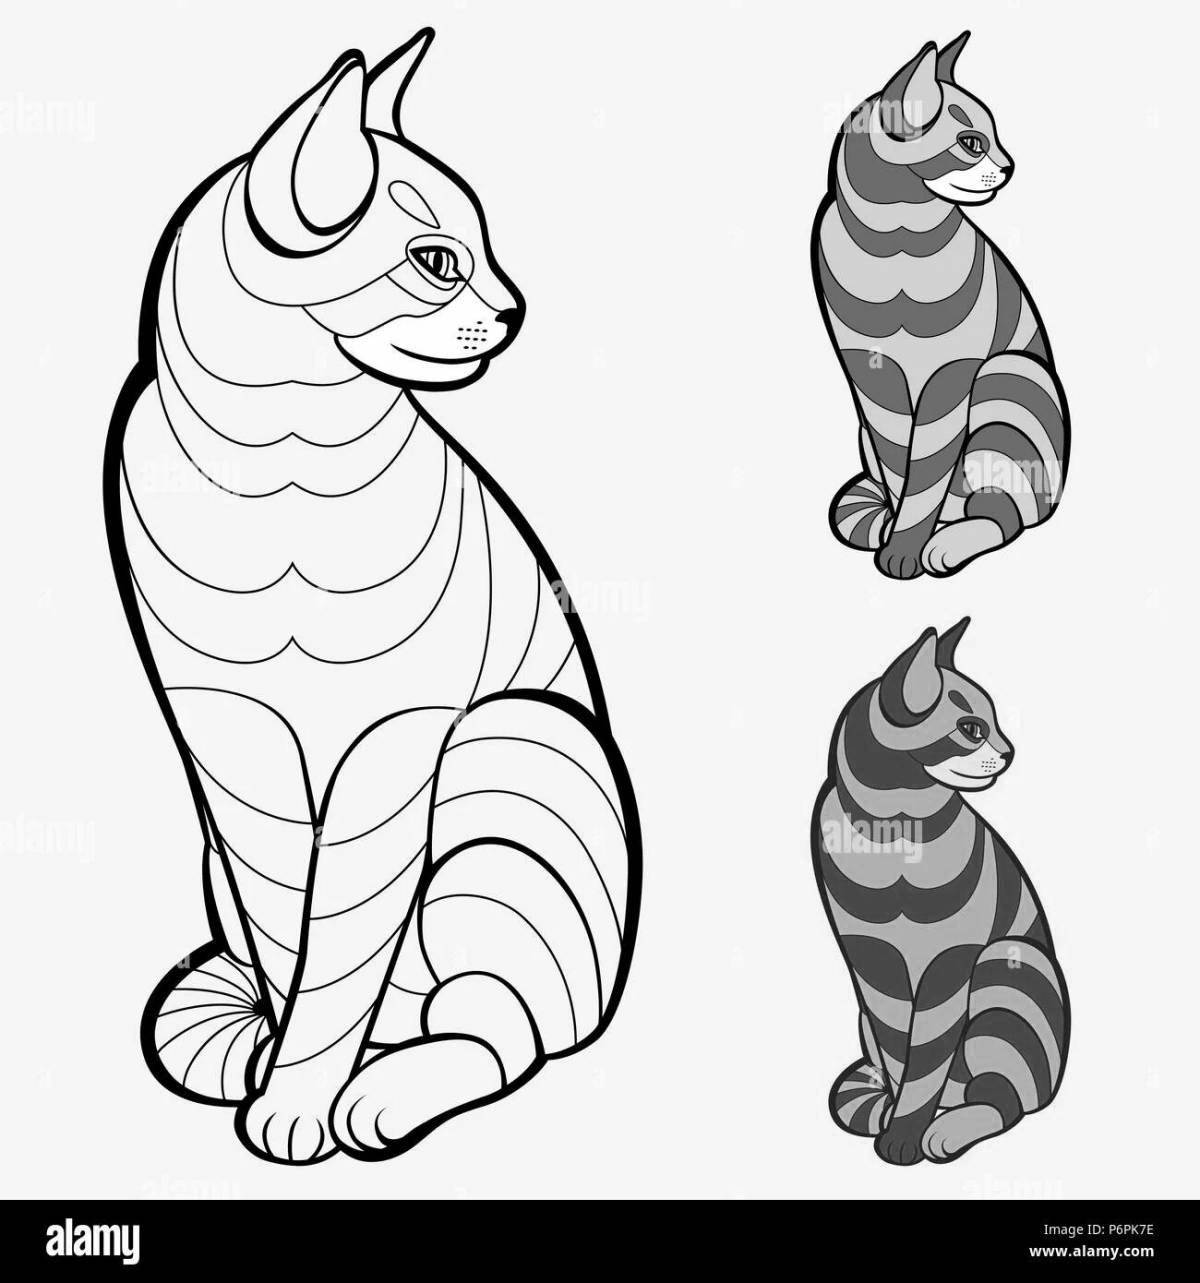 Adorable tabby cat coloring book